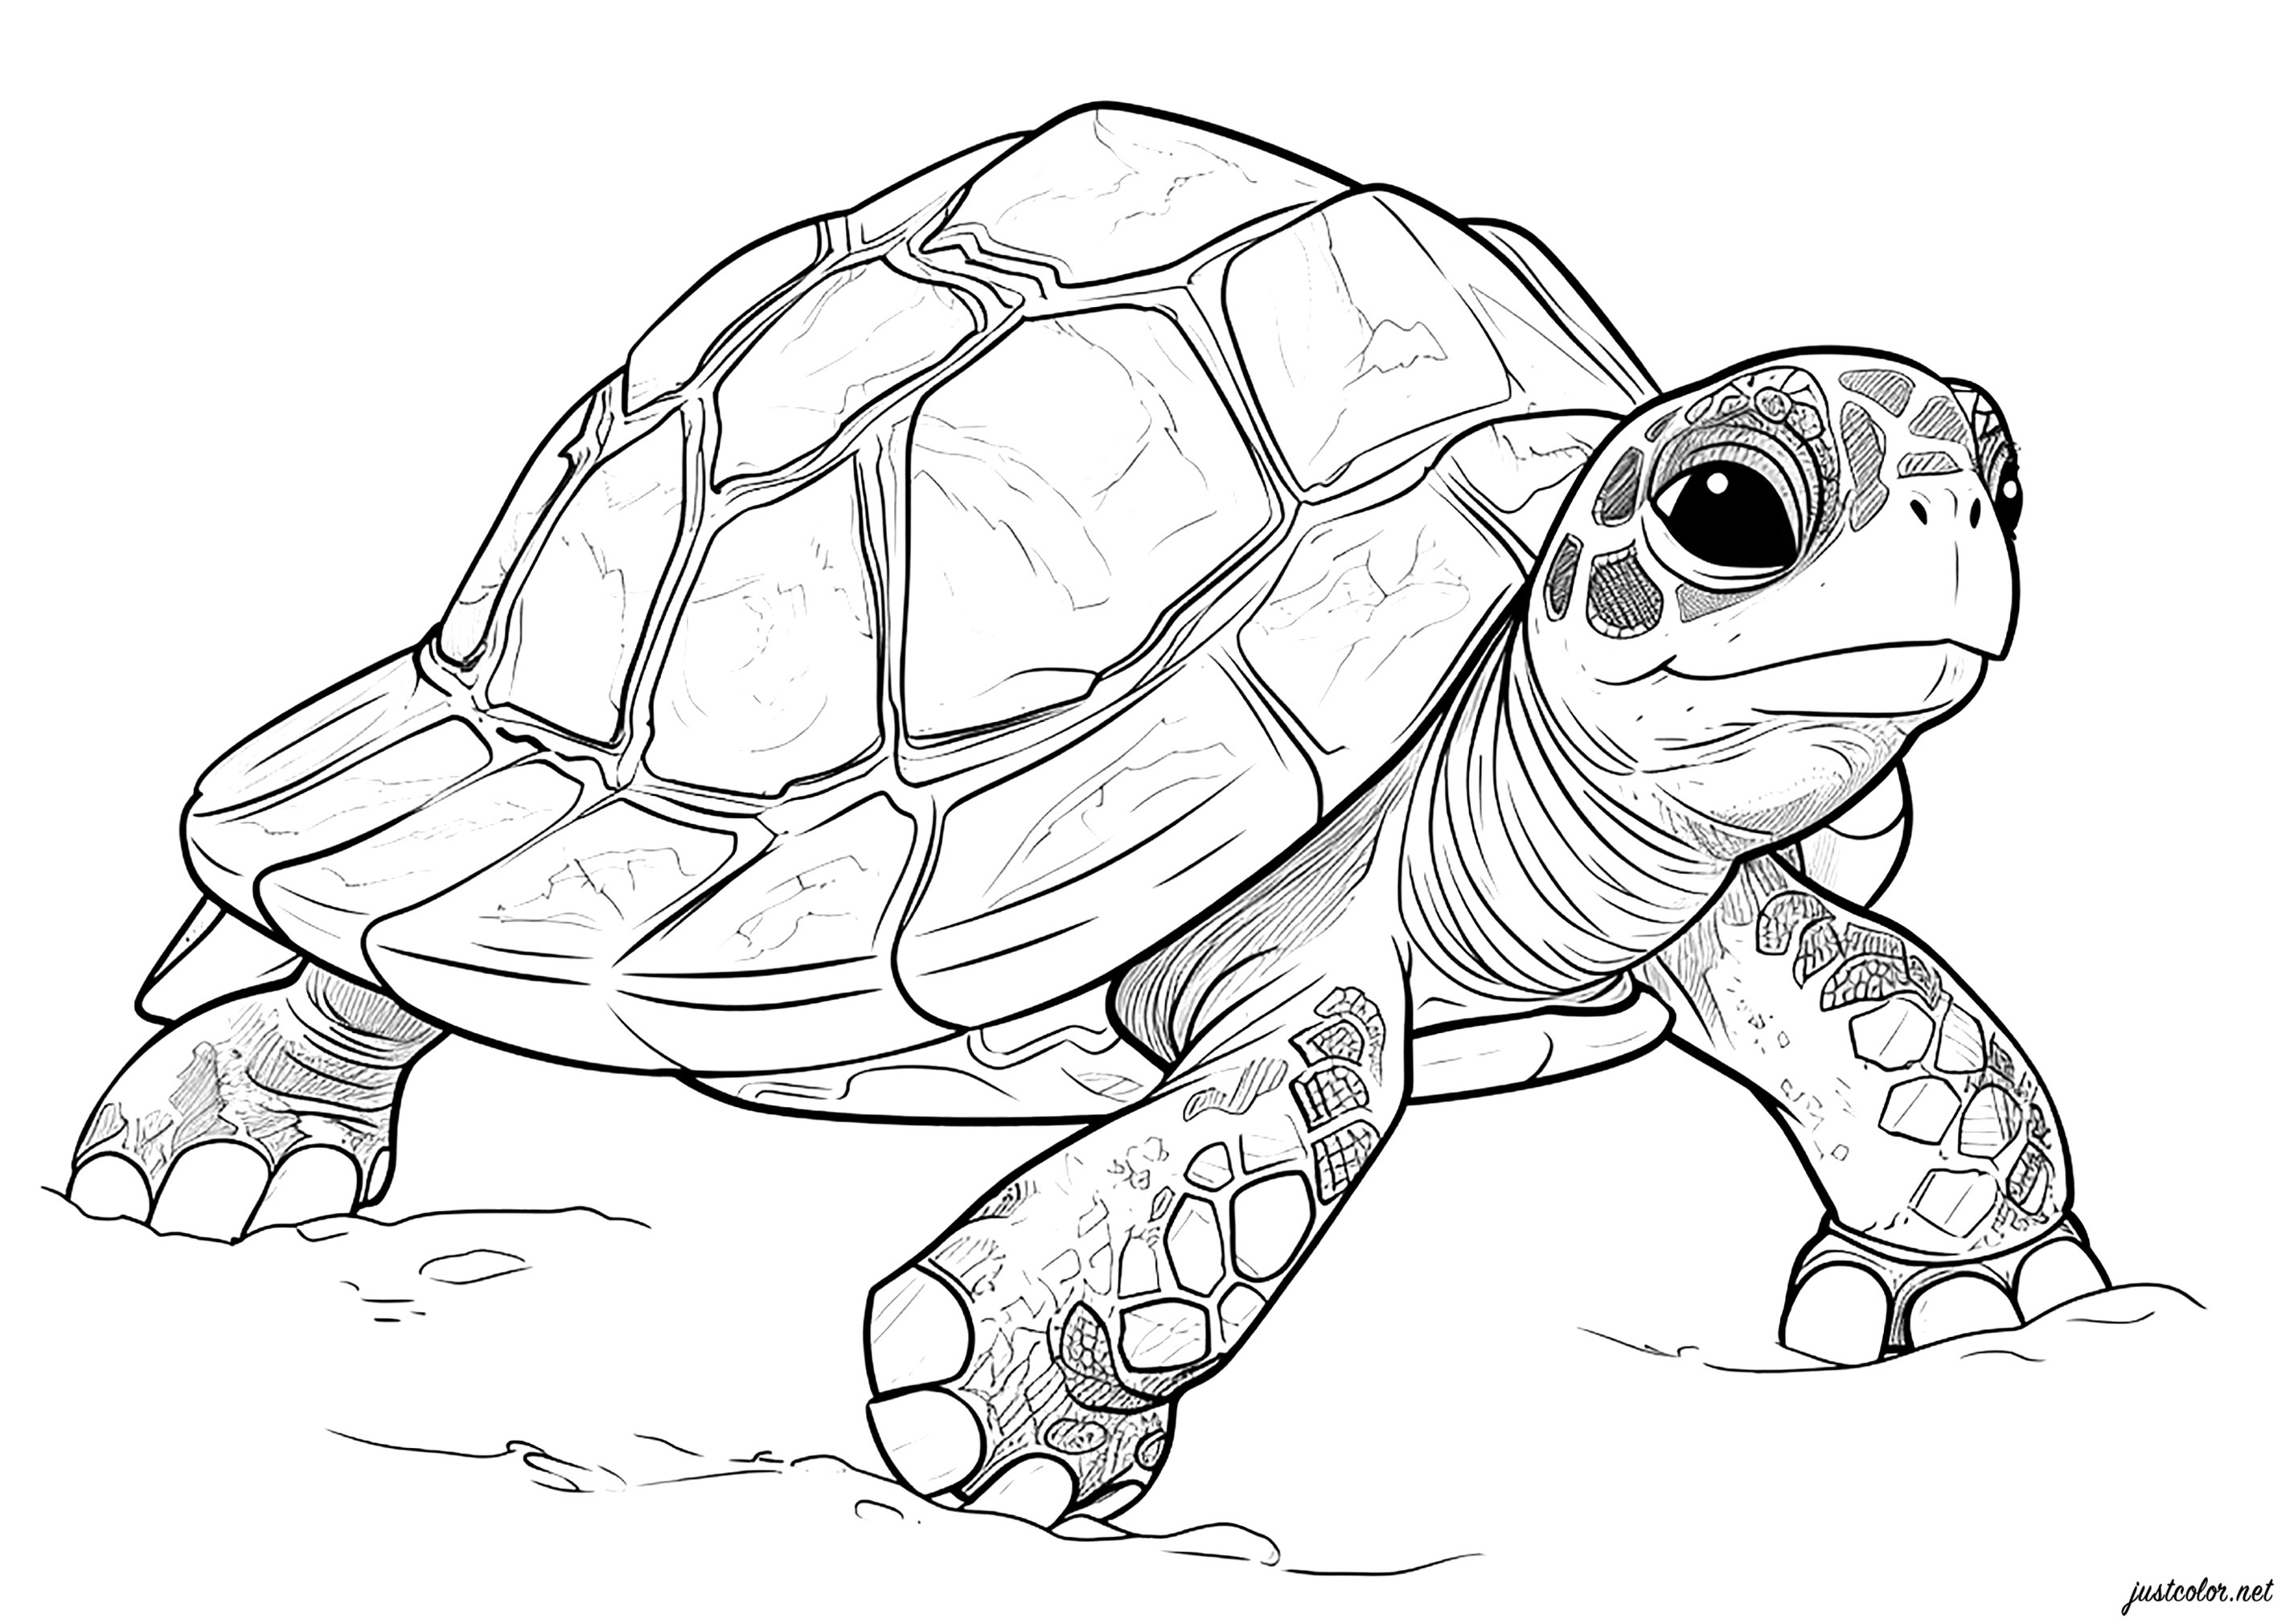 Turtle with beautiful scales - Turtles Kids Coloring Pages